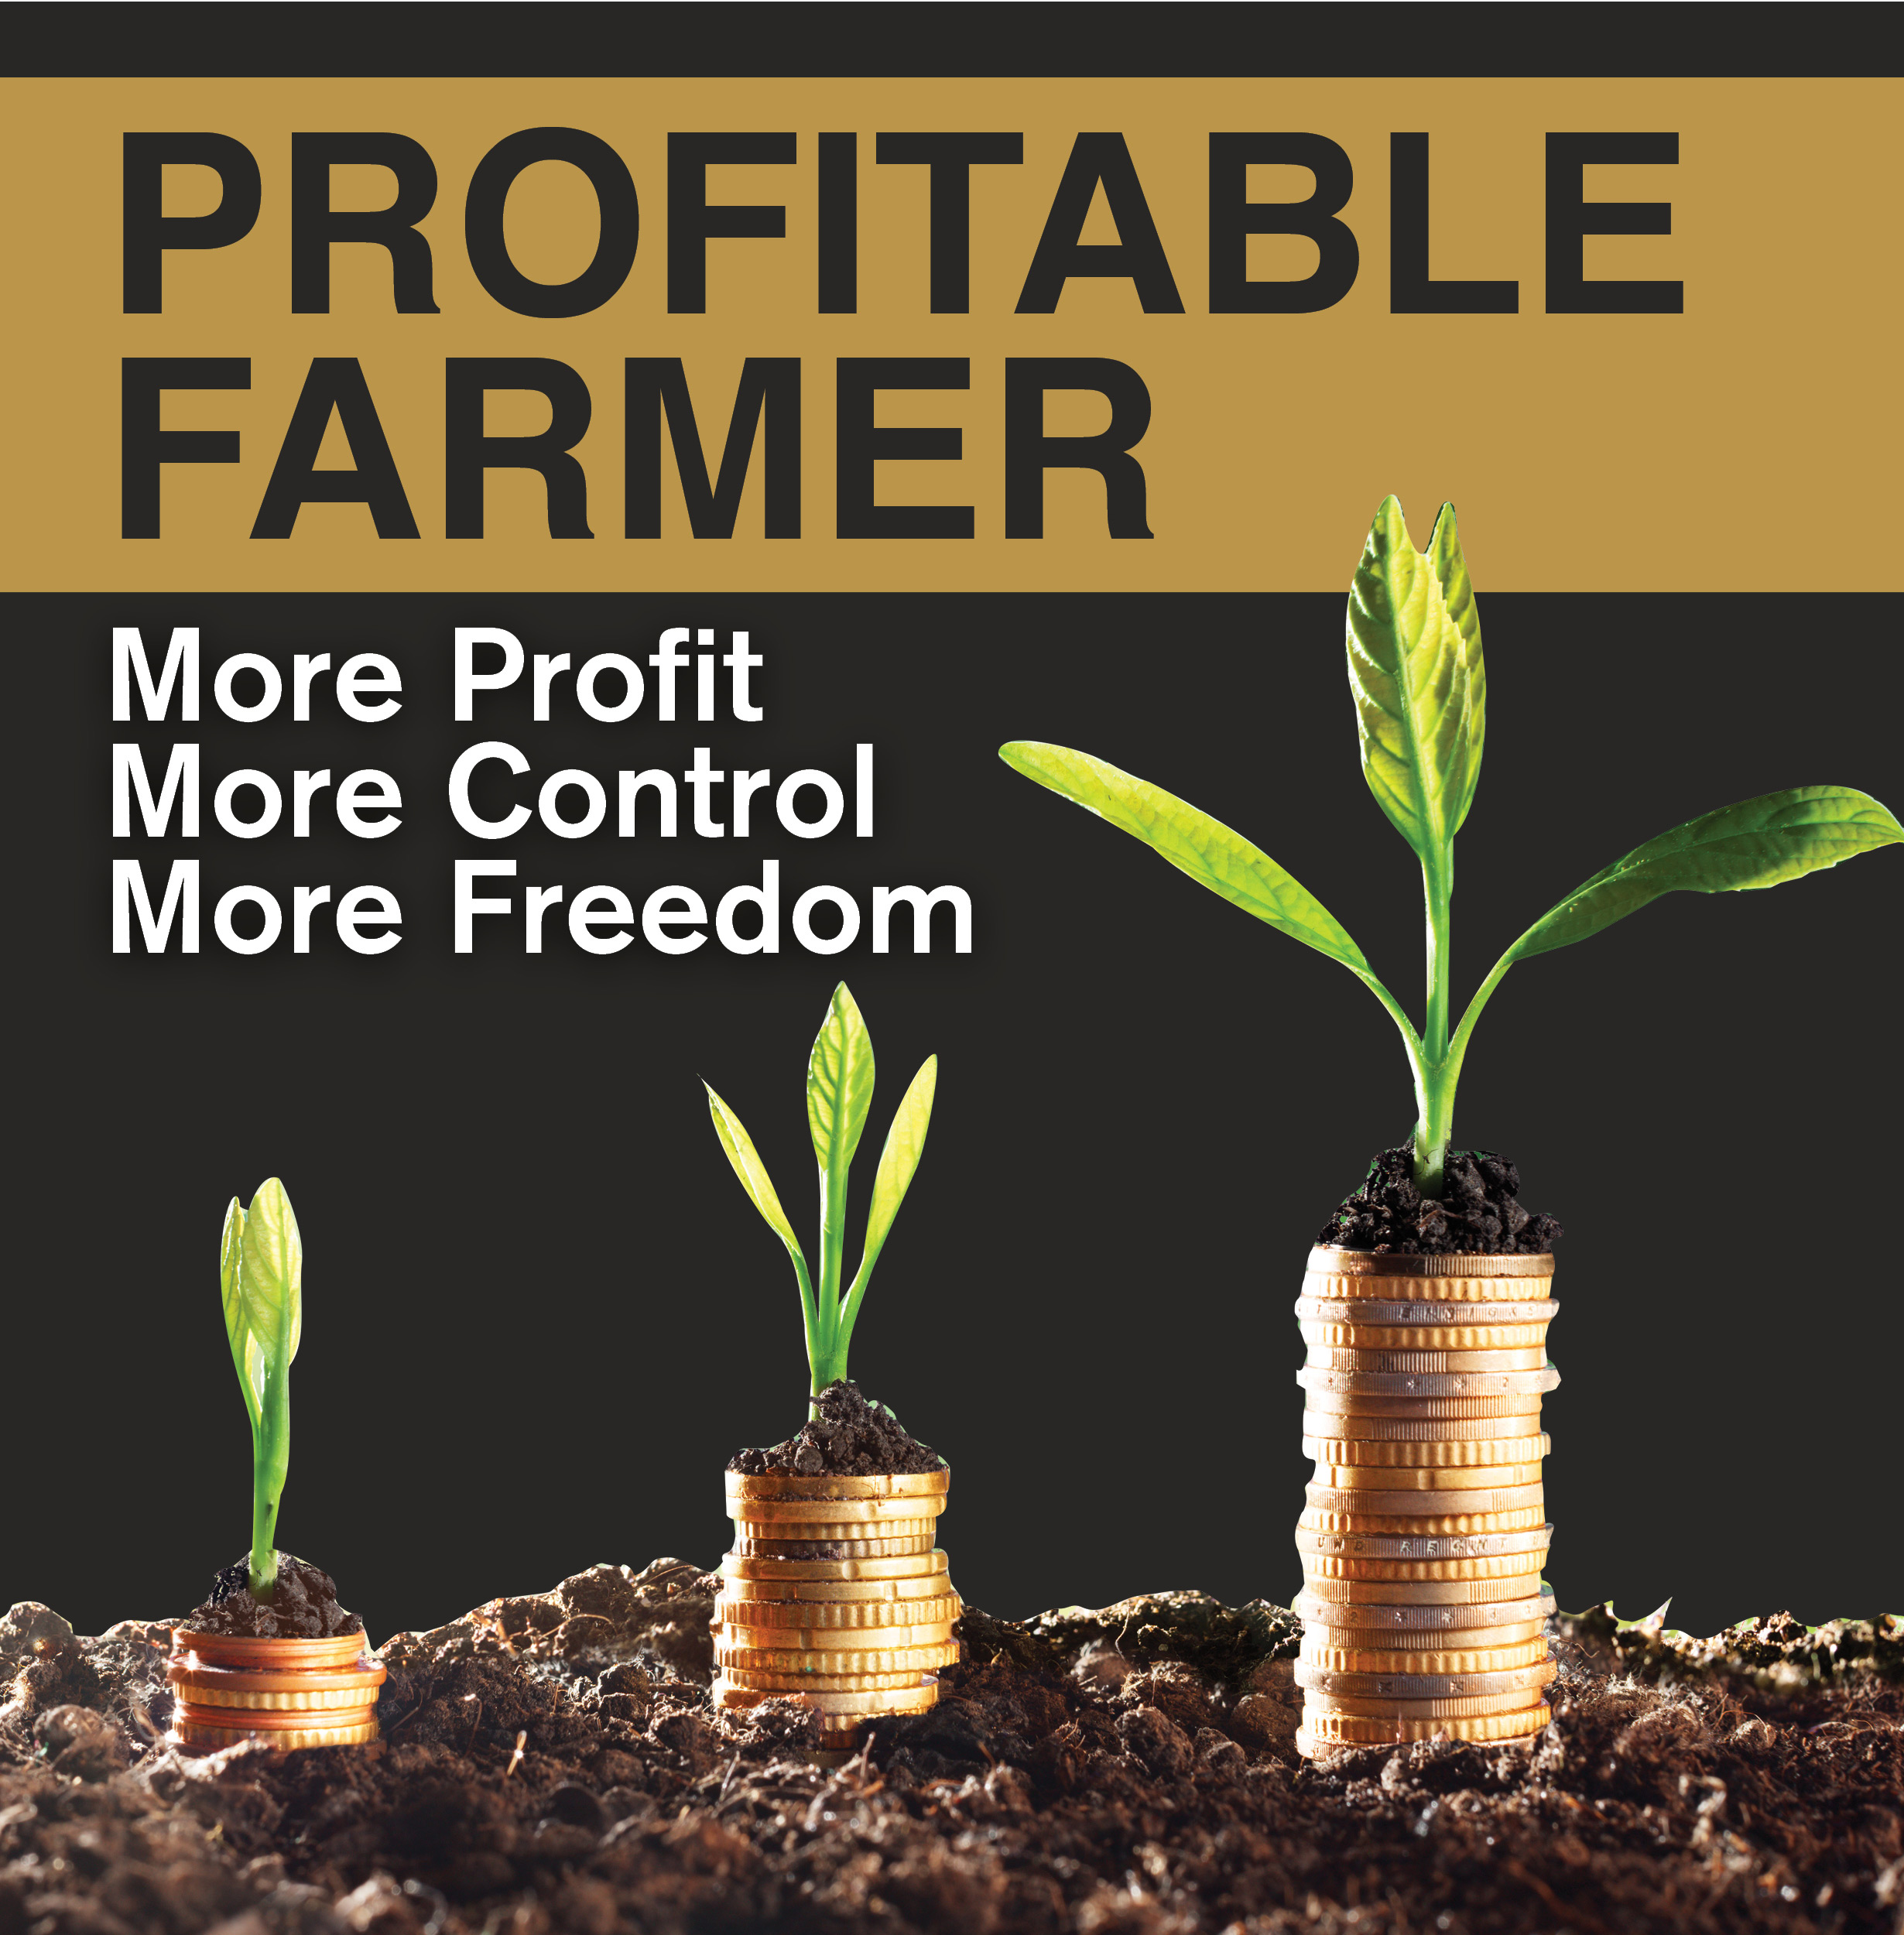 Episode 5: Why doing the technical work on your farm is most likely costing you a lot of profit